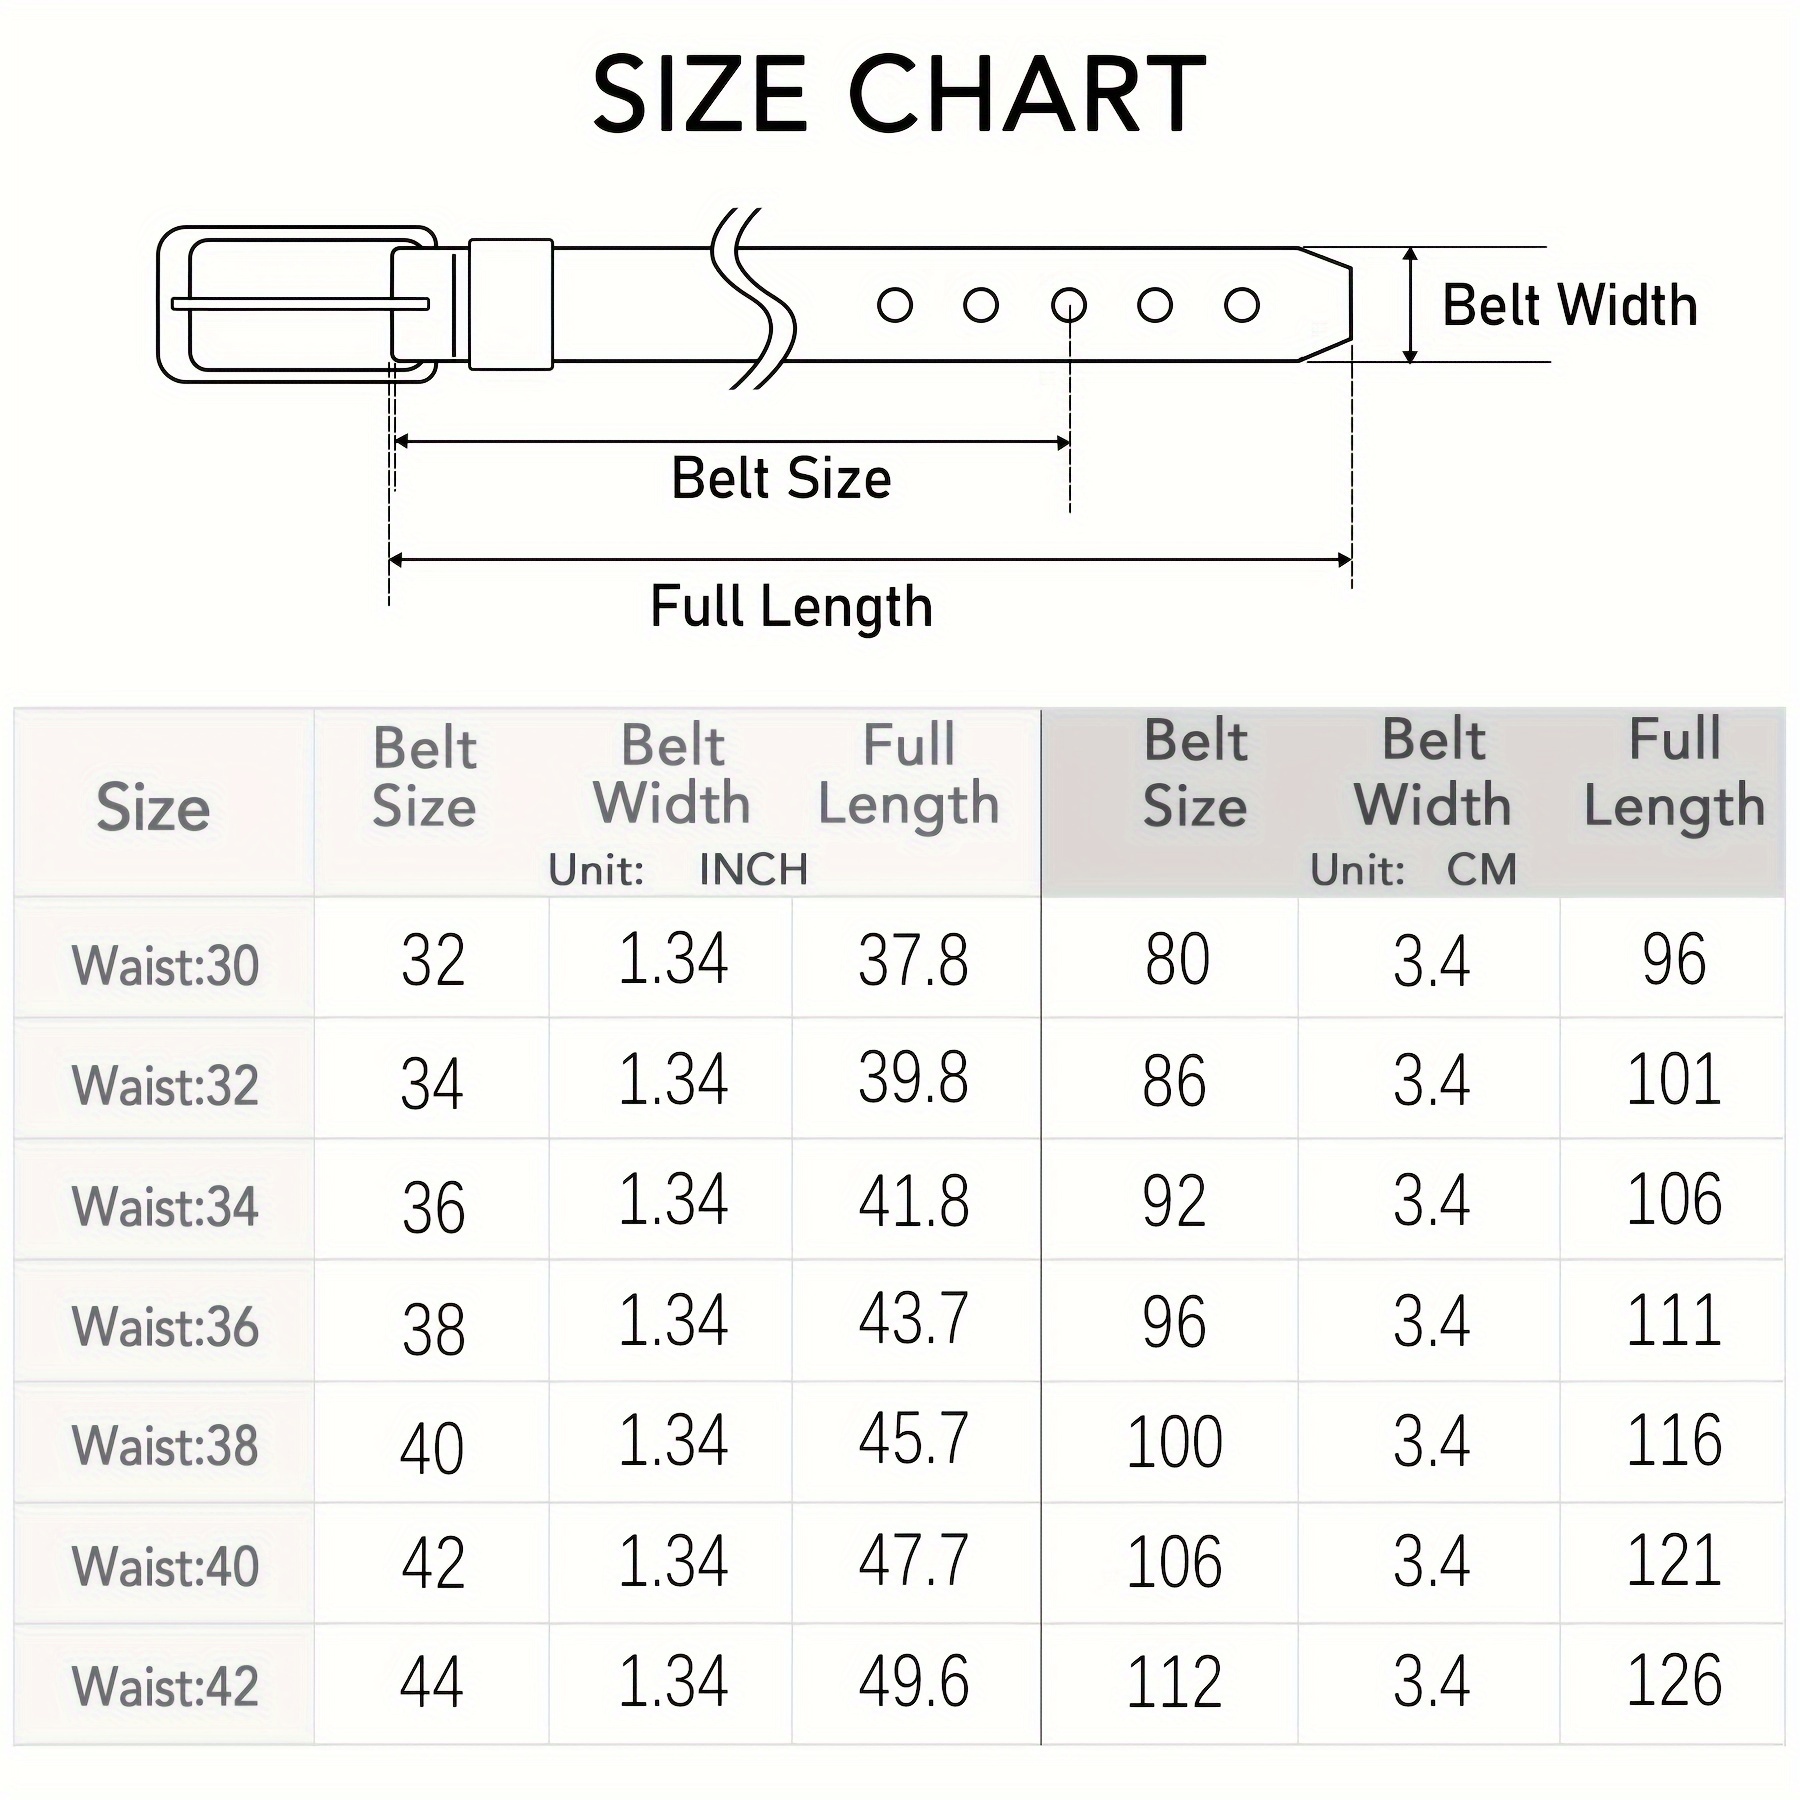 Men's Genuine Leather Dress Belt Fashion & Classic Casual Belts With Single  Prong Buckle For Jeans Pants Work And Business Gifts For Dad Husband 